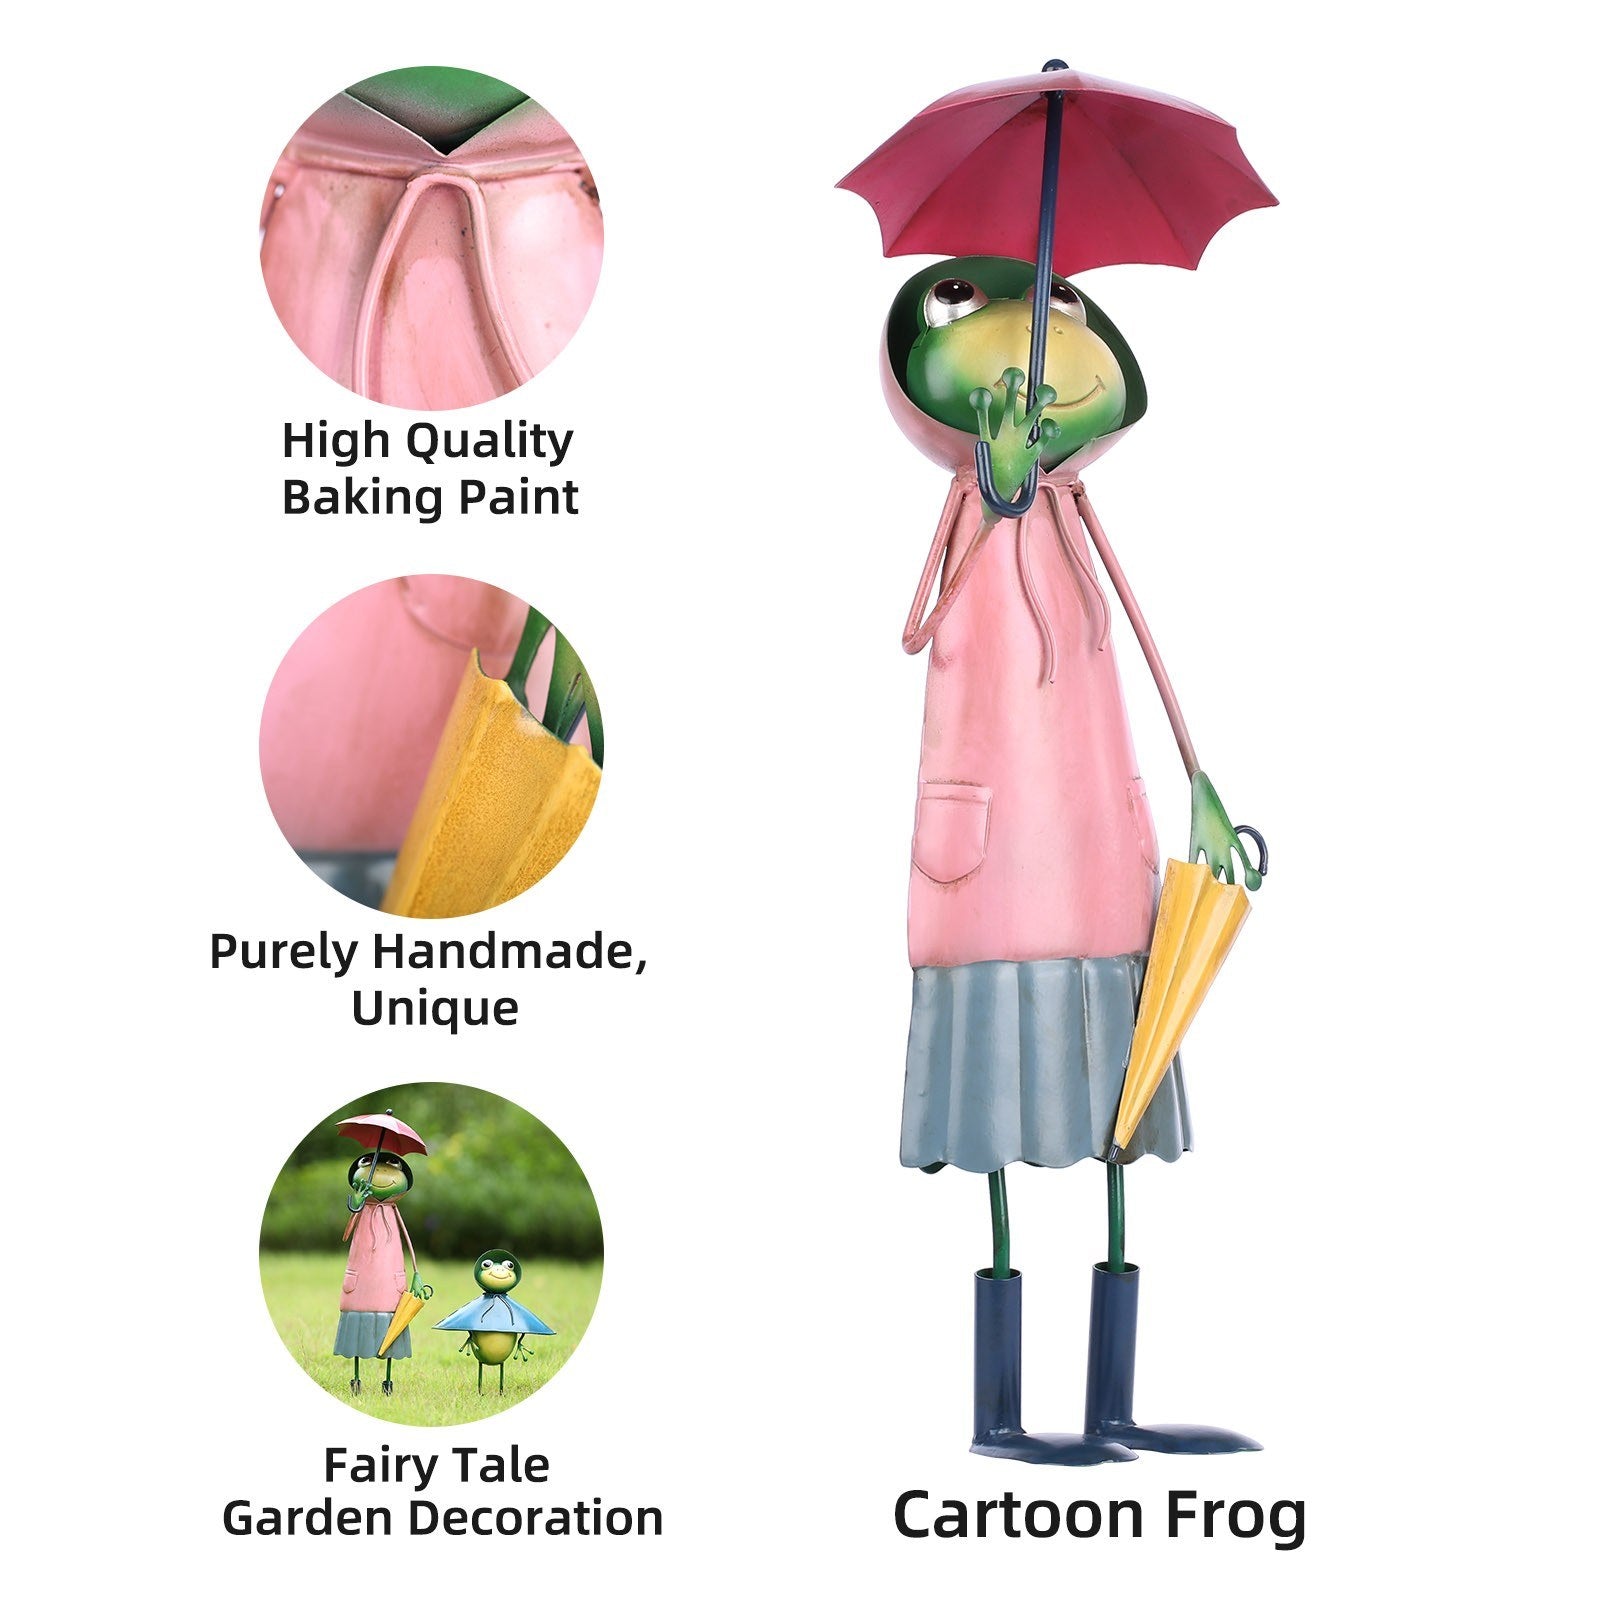 Funniest frog ornament figurine with an umbrella you've ever seen!